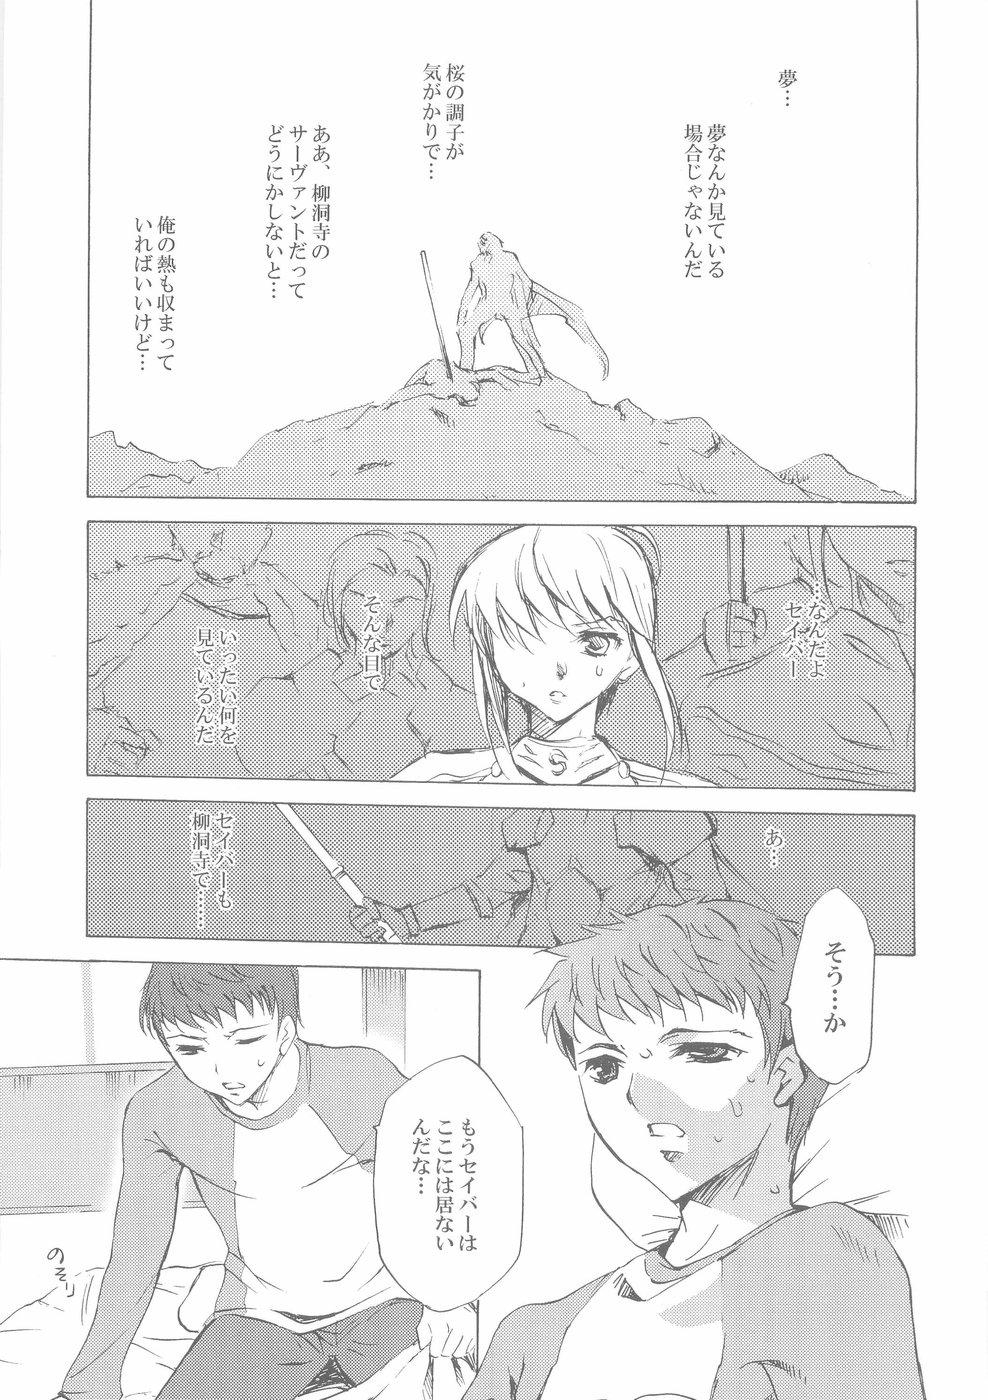 German Face II stay with my love - Fate stay night Home - Page 2